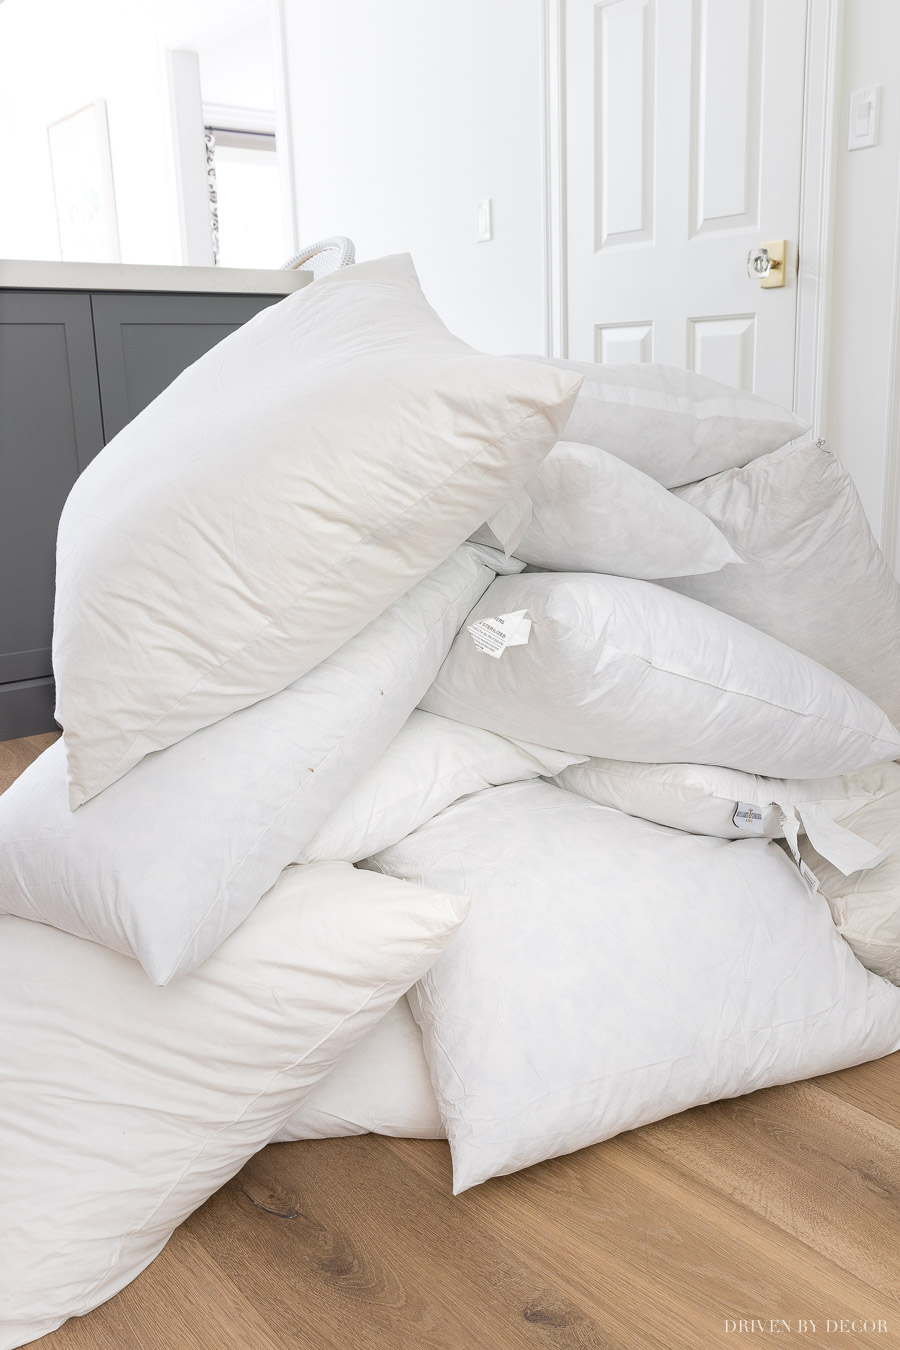 Sharing how to store your pillow inserts so they take up SO much less space!